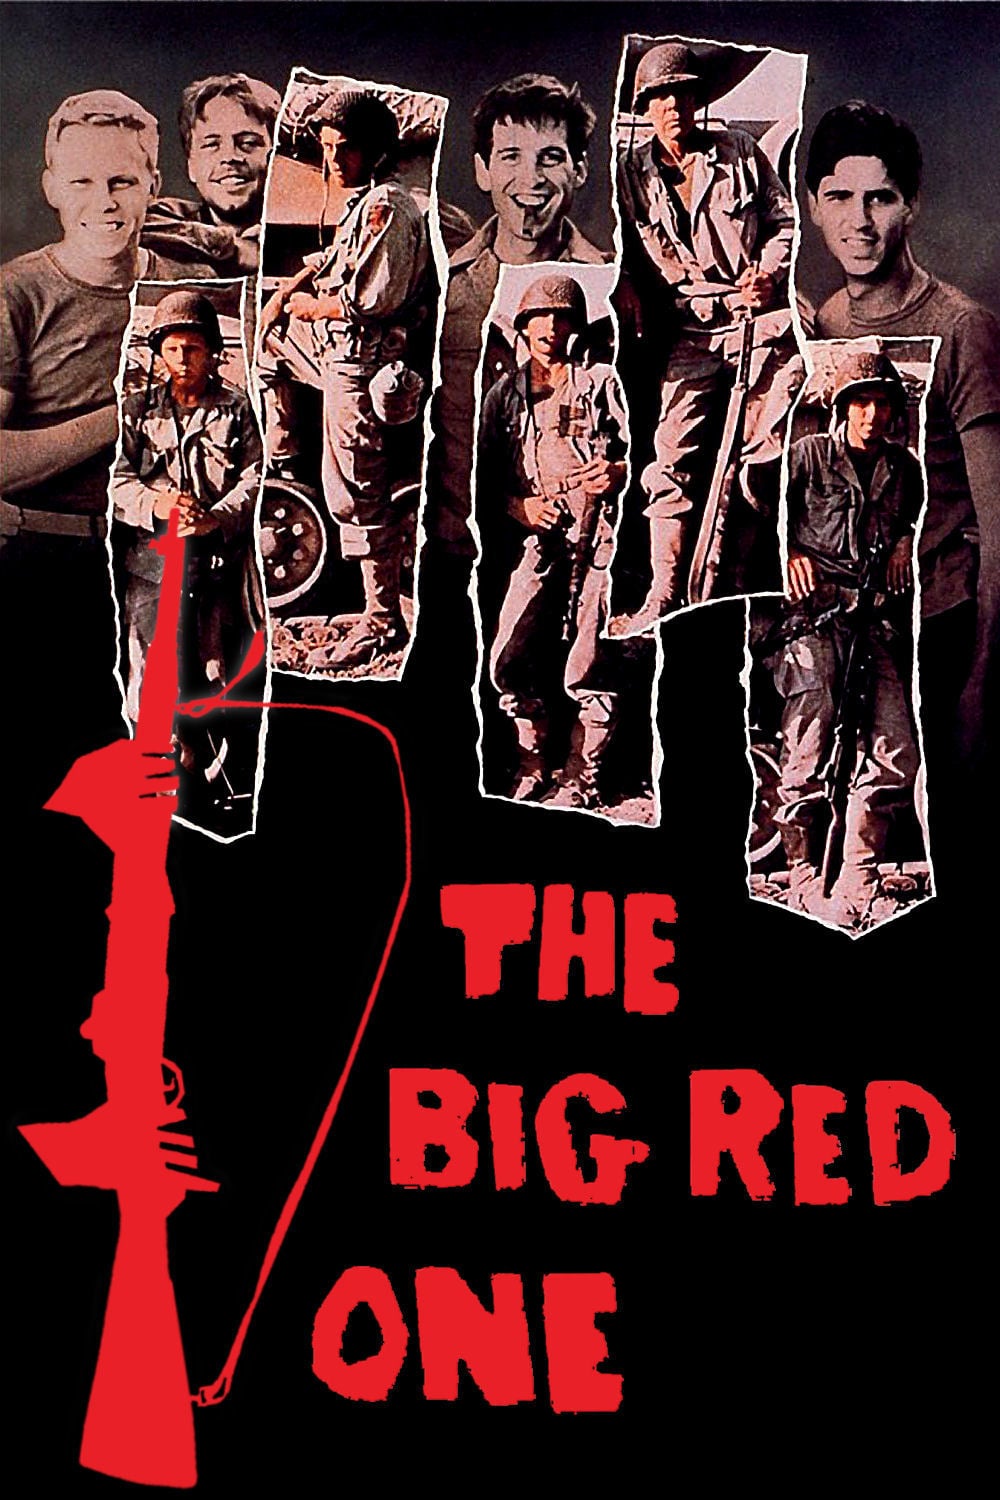 Poster for the movie "The Big Red One"